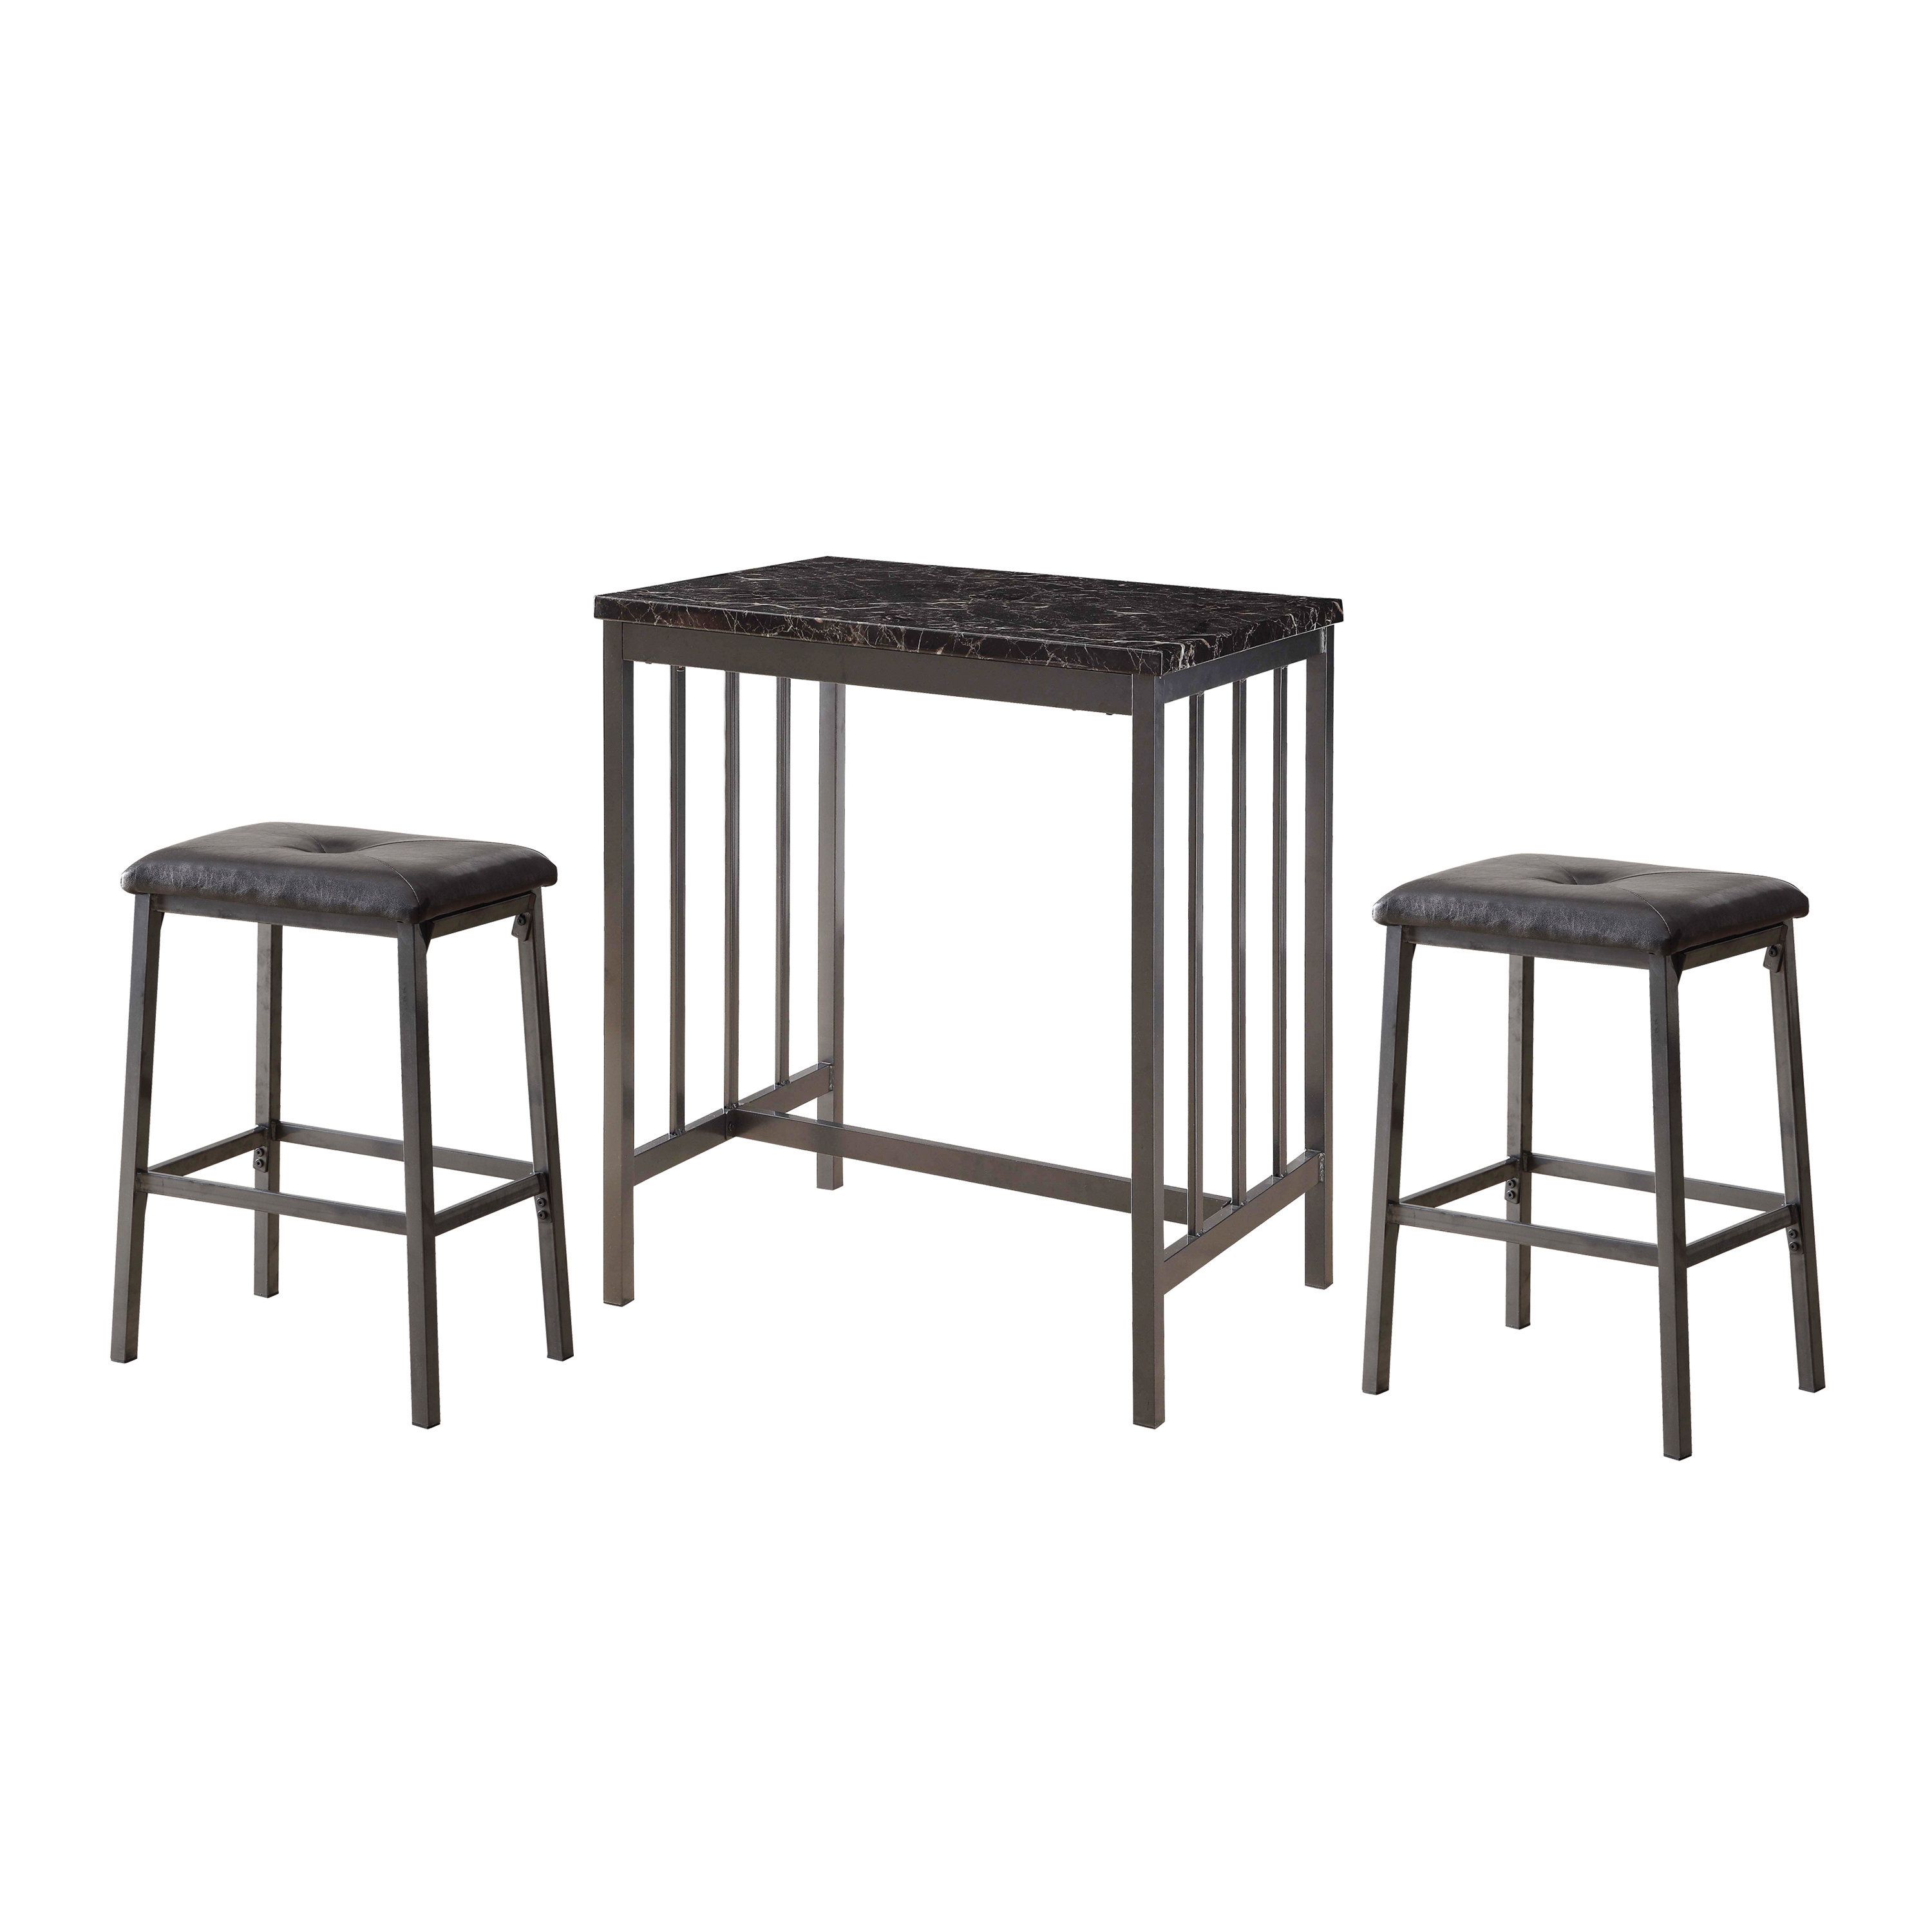 Miskell 3 Piece Dining Sets Inside Well Liked Winston Porter Acme Venator 3 Pieces Pack Counter Height Set In Grey (View 15 of 20)